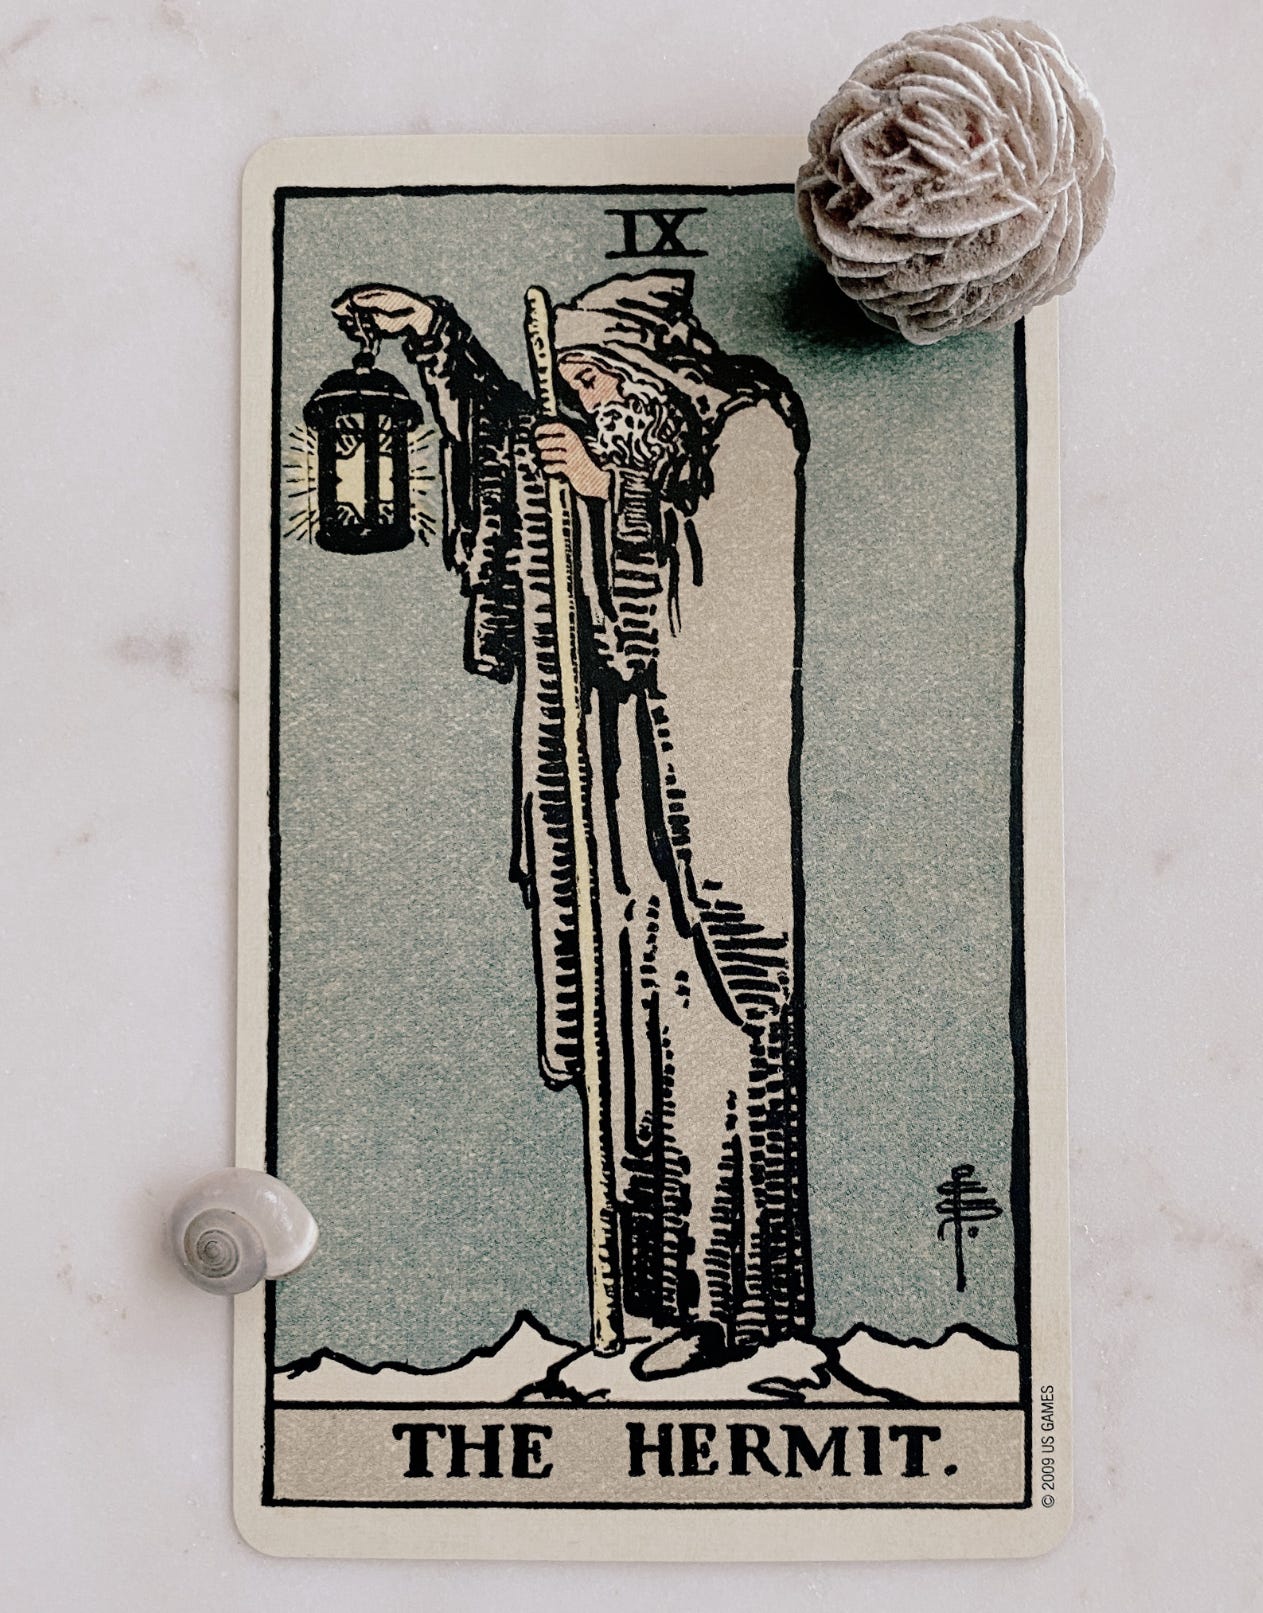 Image of The Hermit card from the Smith-Waite tarot